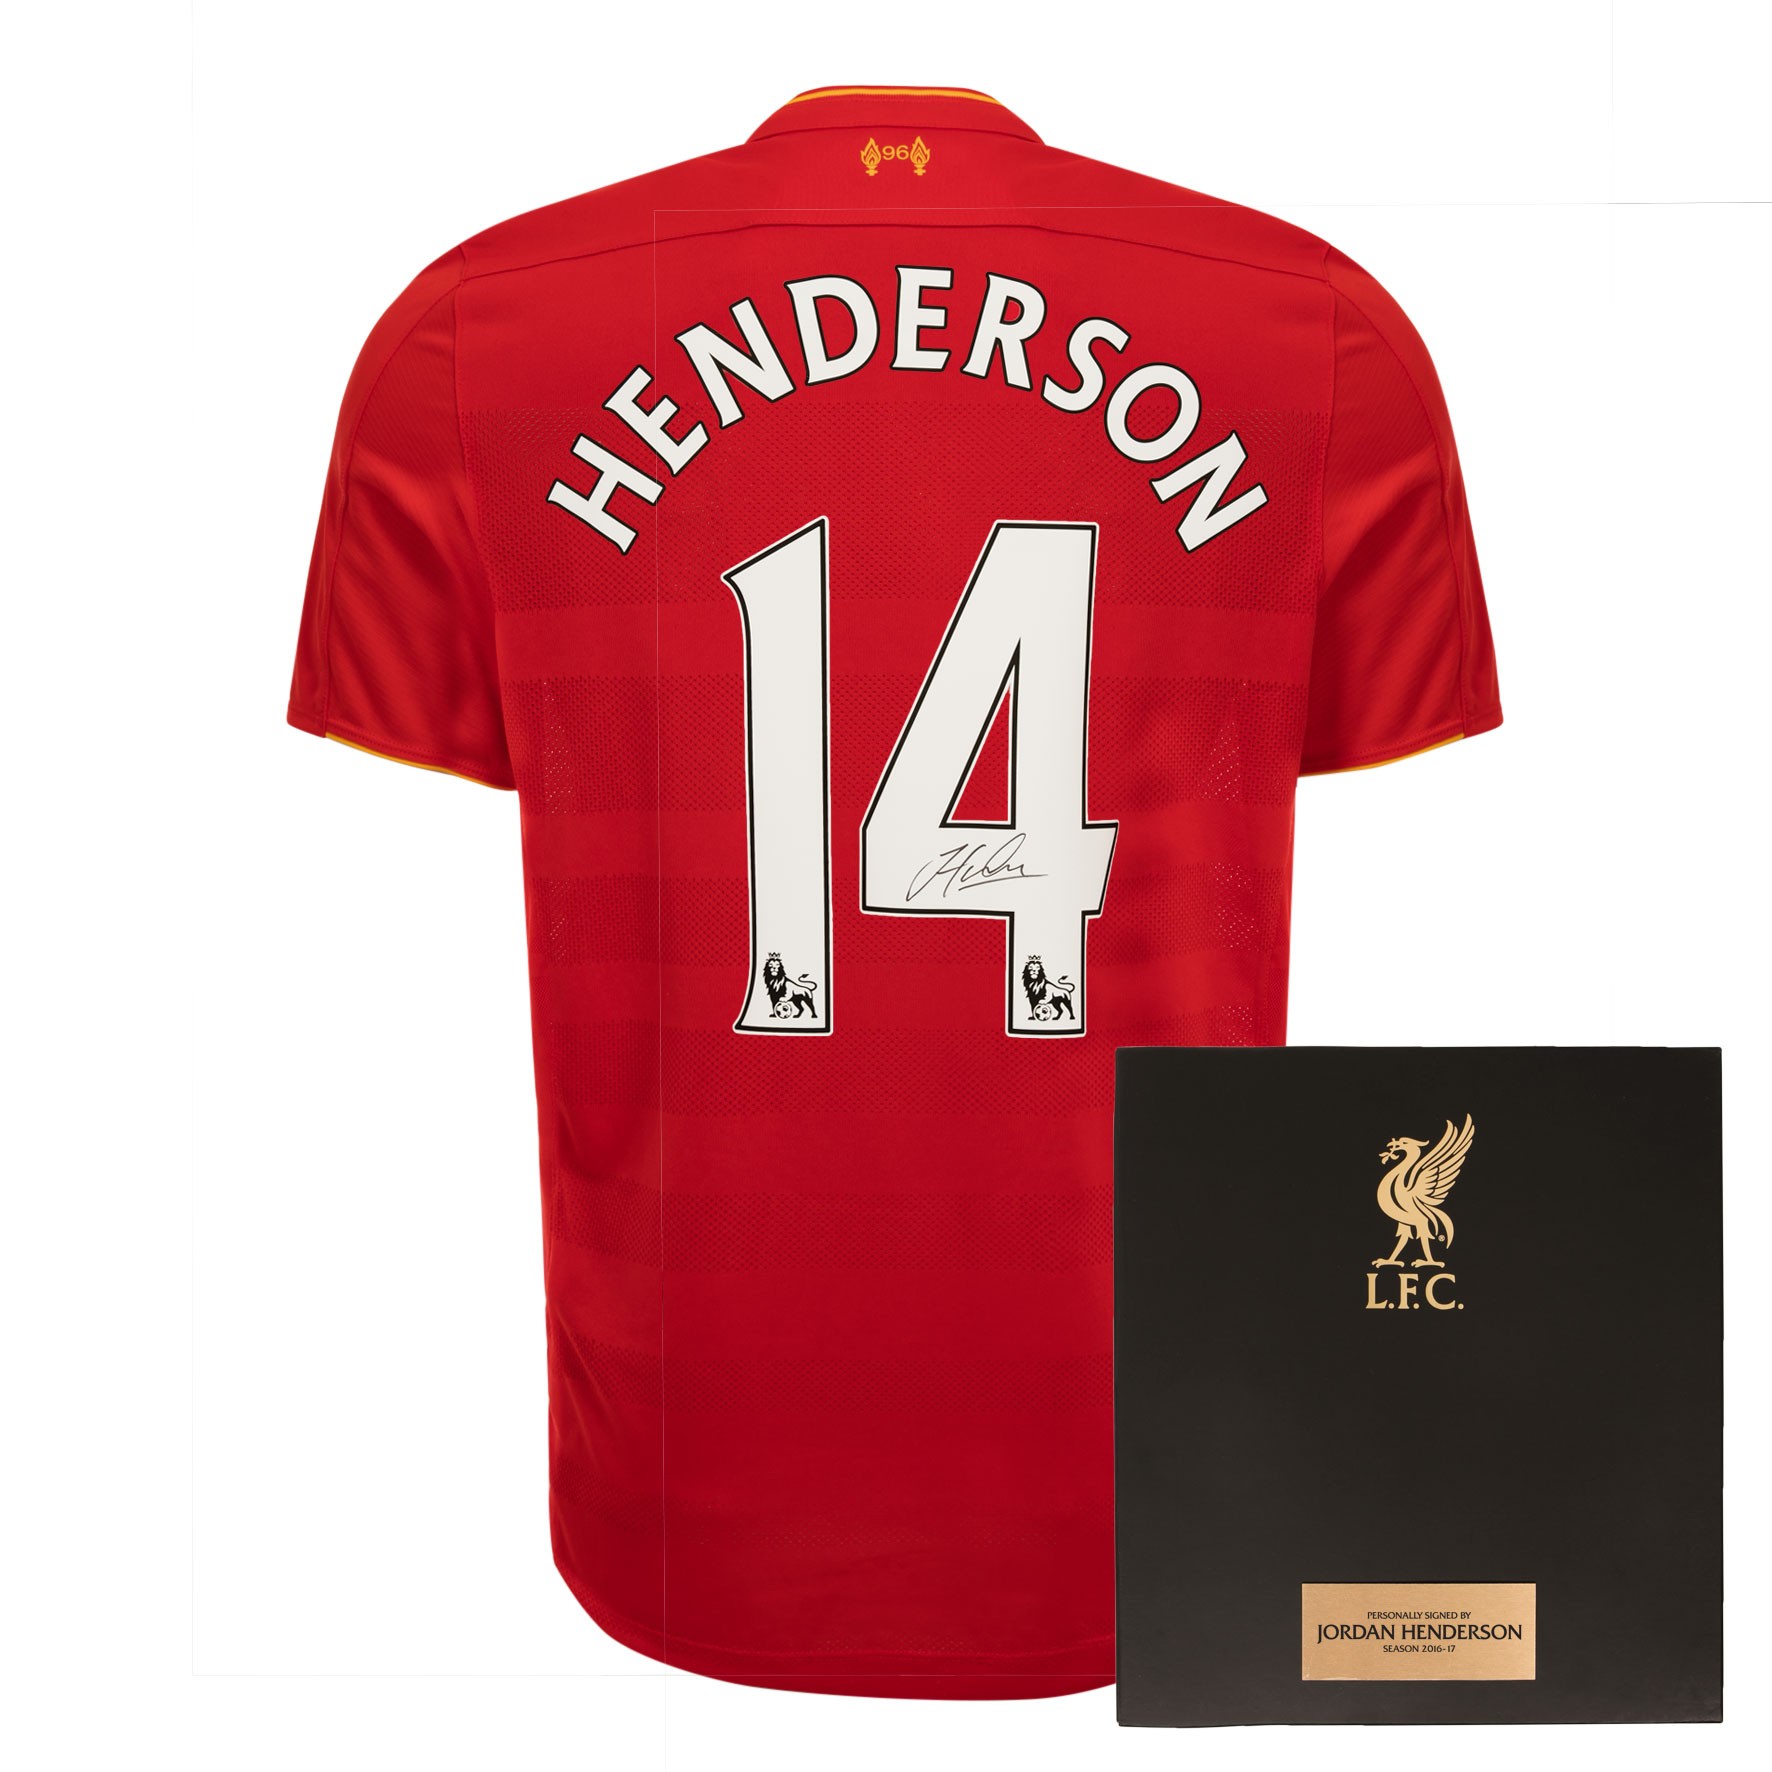 LFC 16/17 ‘Henderson’ Signed Boxed Shirt